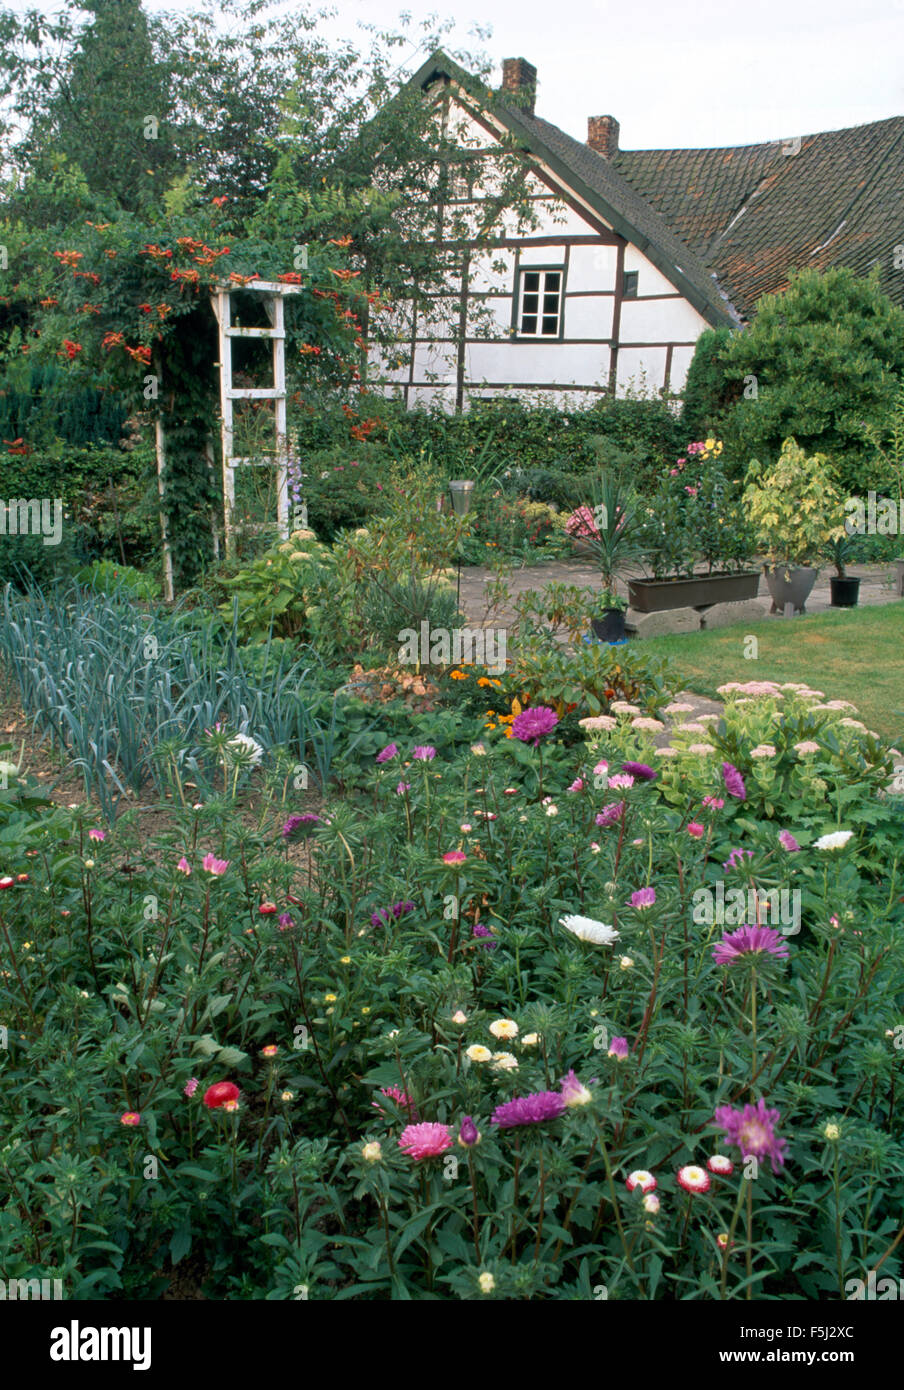 Asters and leeks growing together in the garden of a country cottage Stock Photo